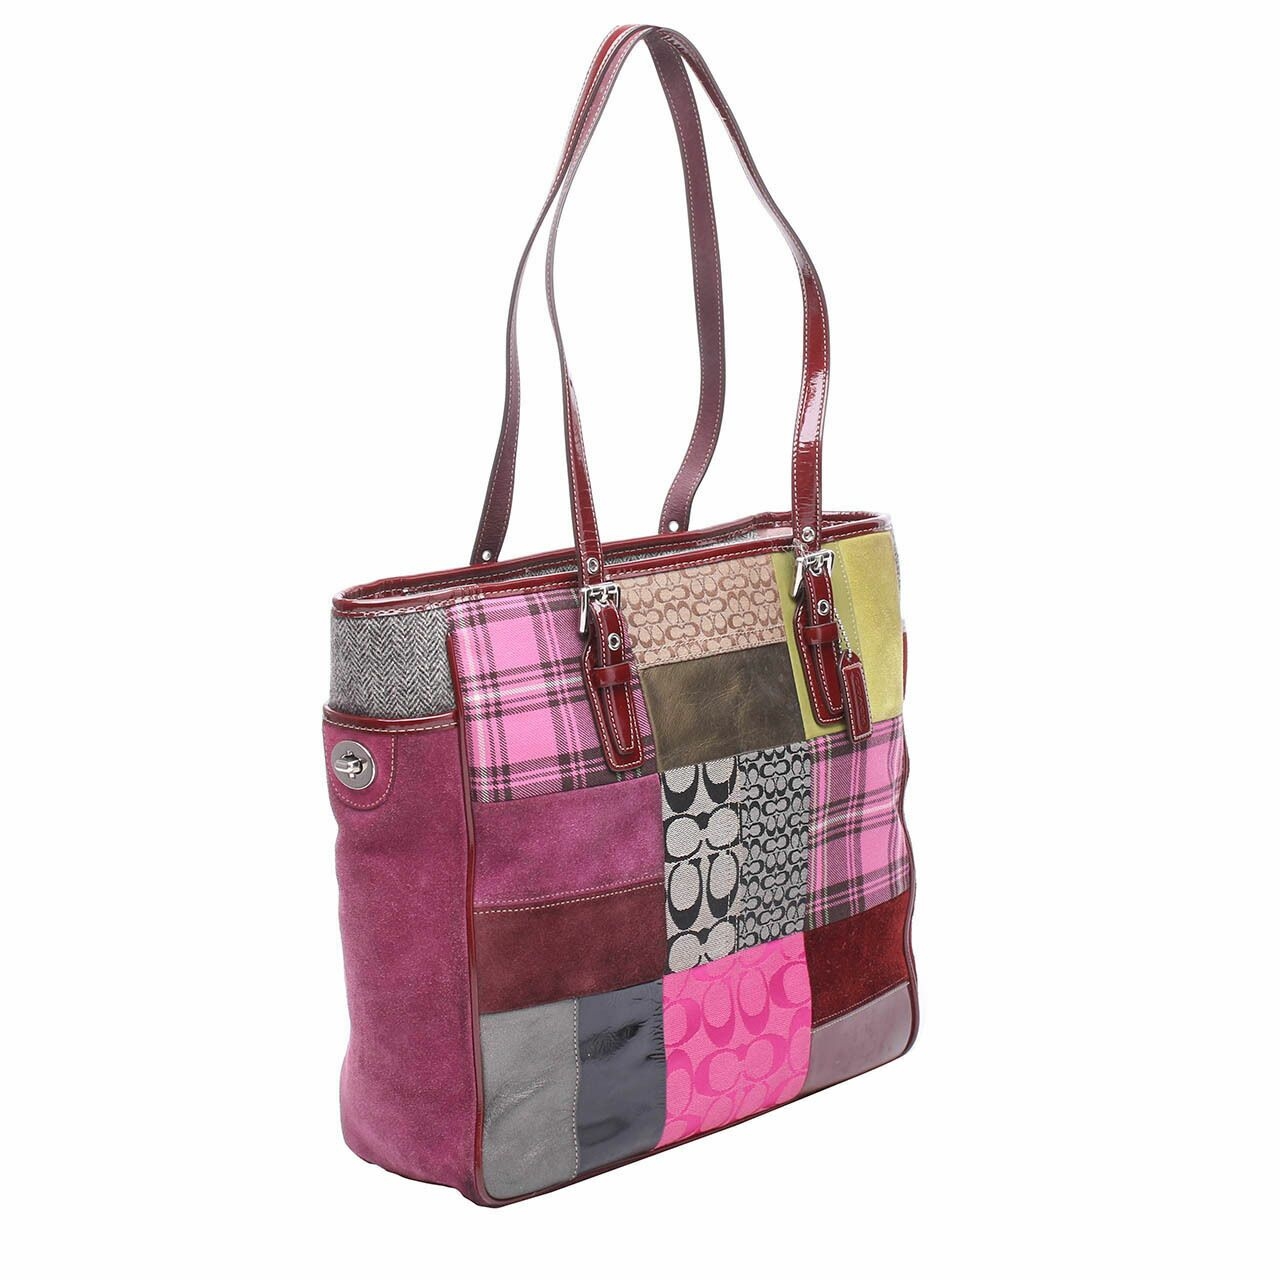 Coach Holiday Multi Color Patchwork Tote Hand Bag	